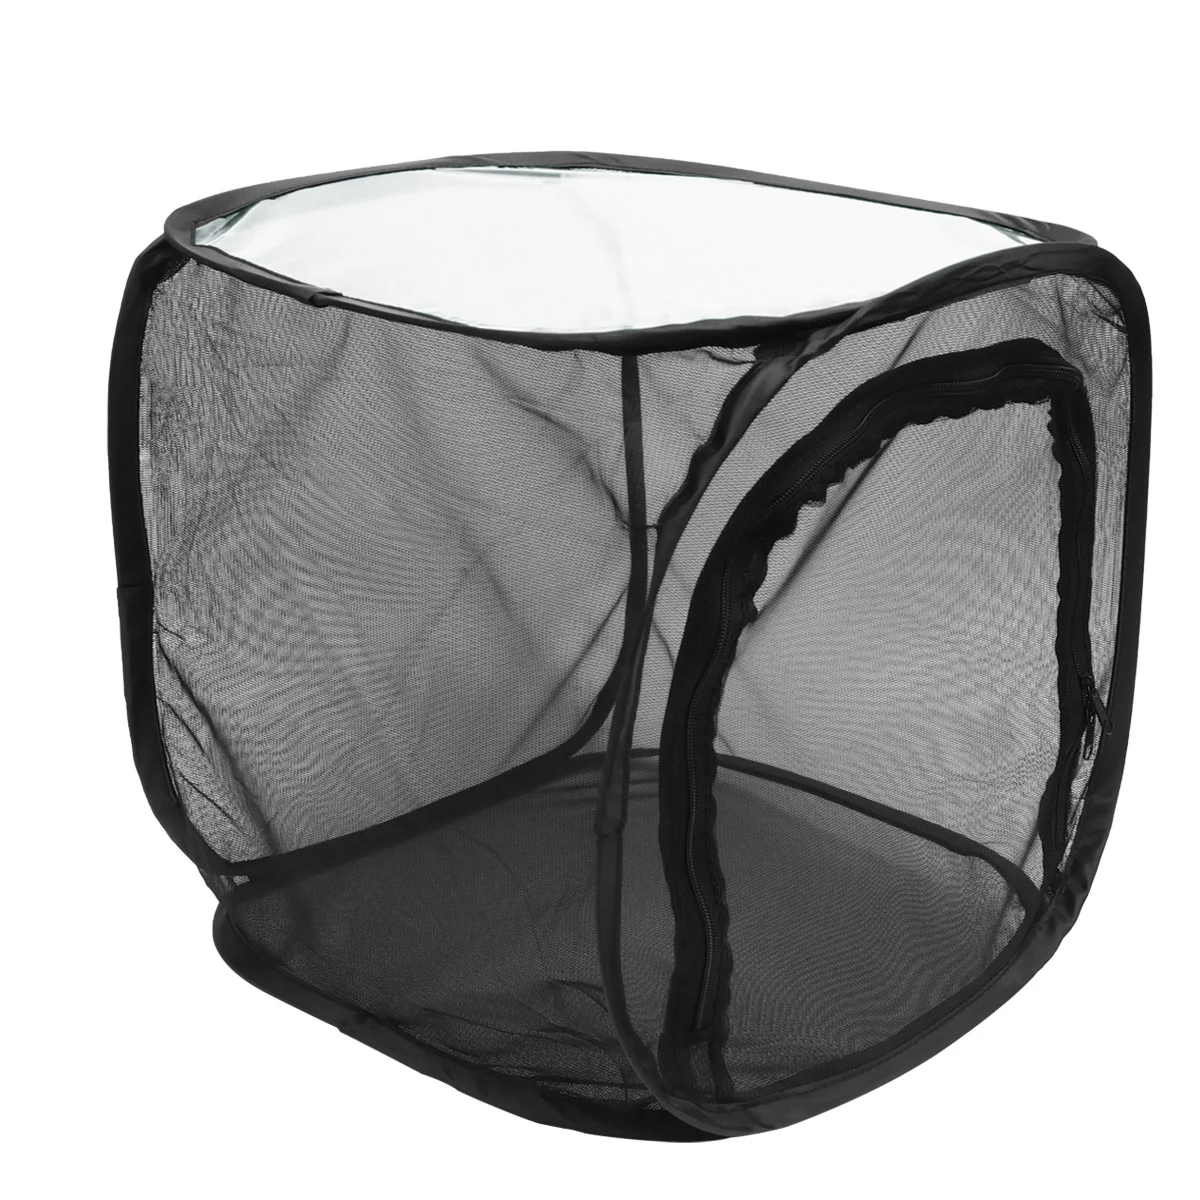 

Insect Cage Collapsible Habitat Cage Mesh House Terrarium- Nature Exploration for Kids Observation Gardening Outdoor Bug Toy